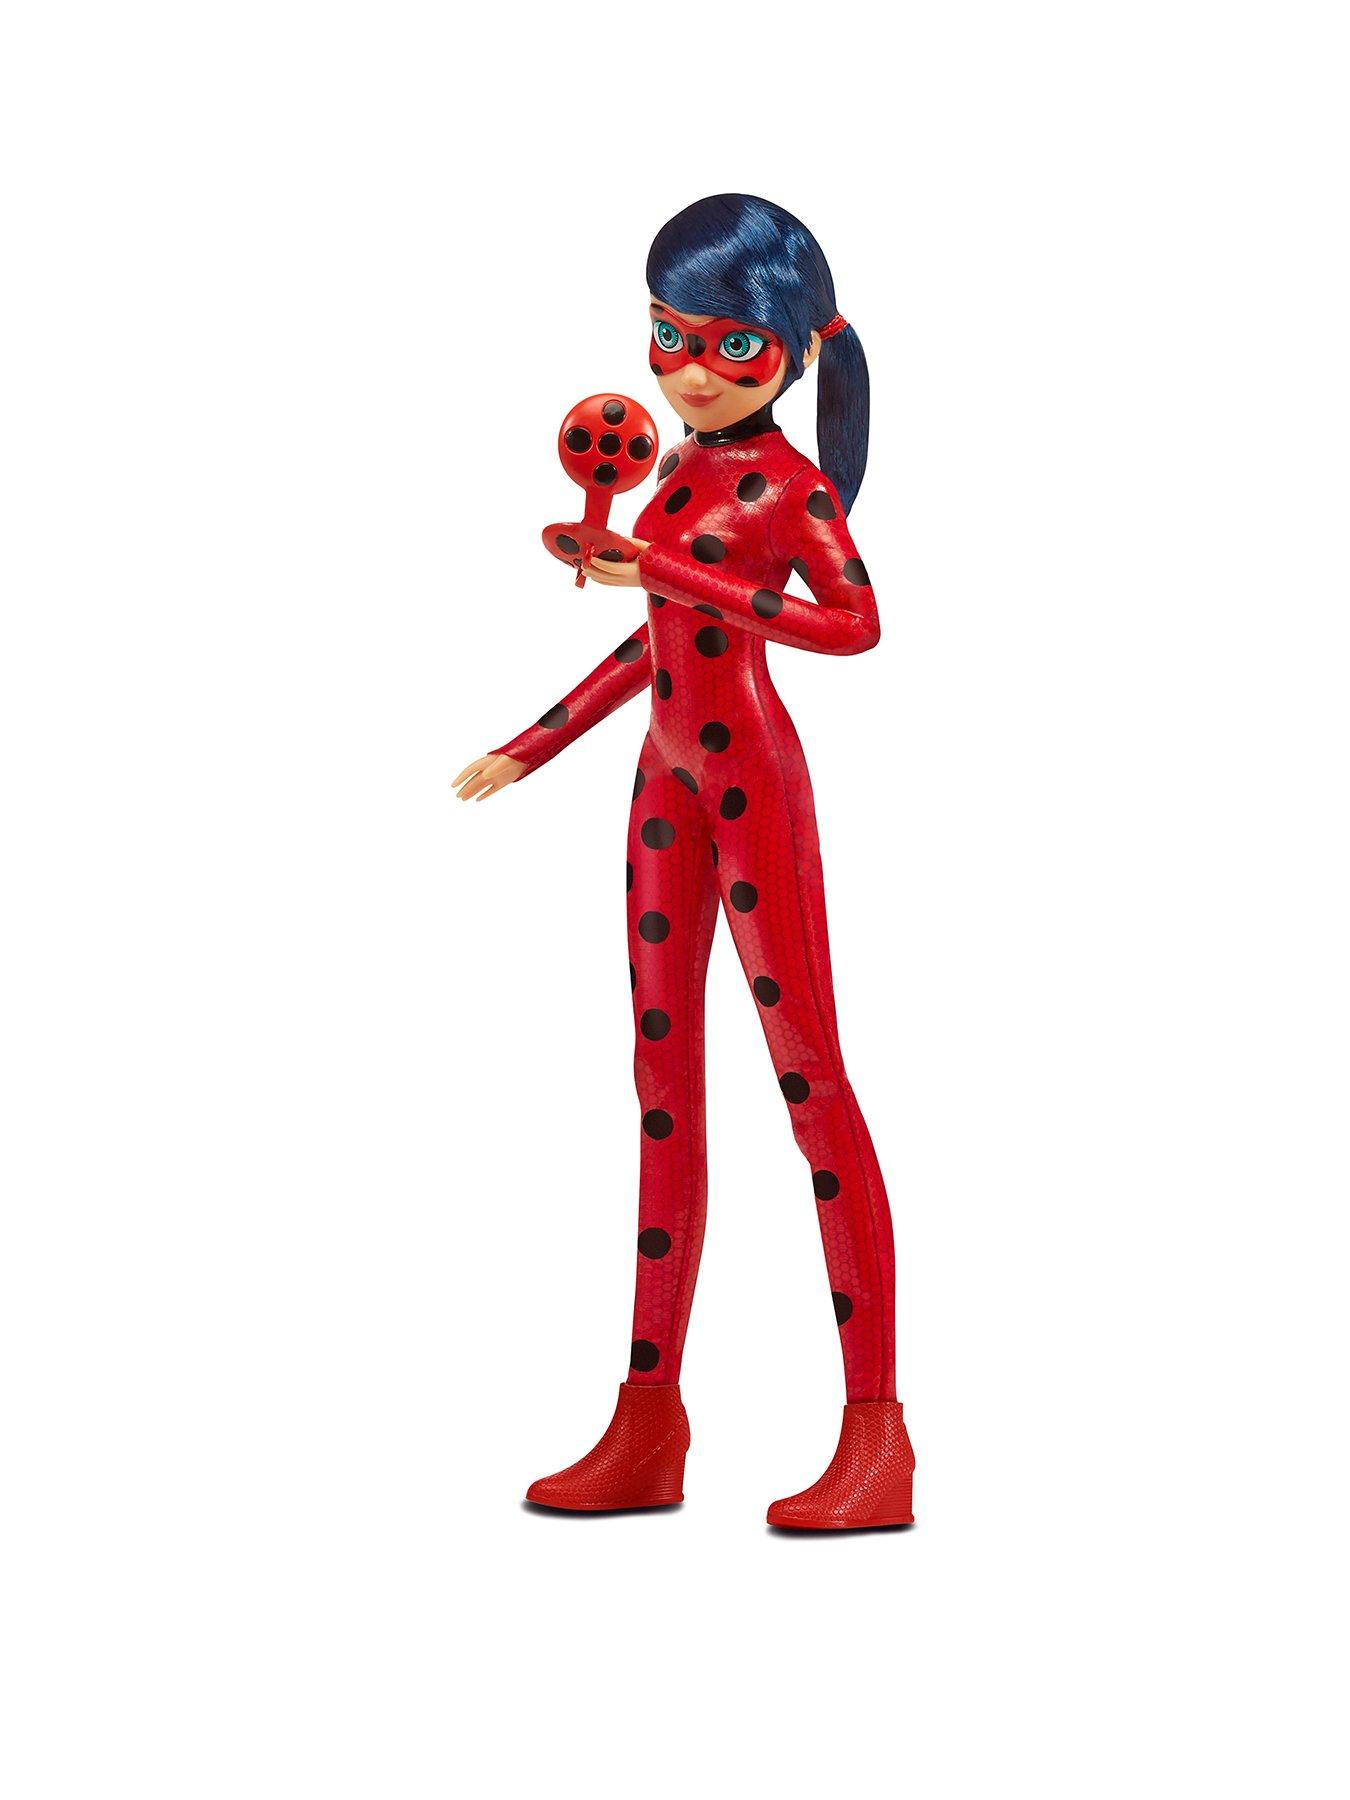 Fake Miraculous Ladybug Toys Queen Bee Rena Rogue Kwami and more 